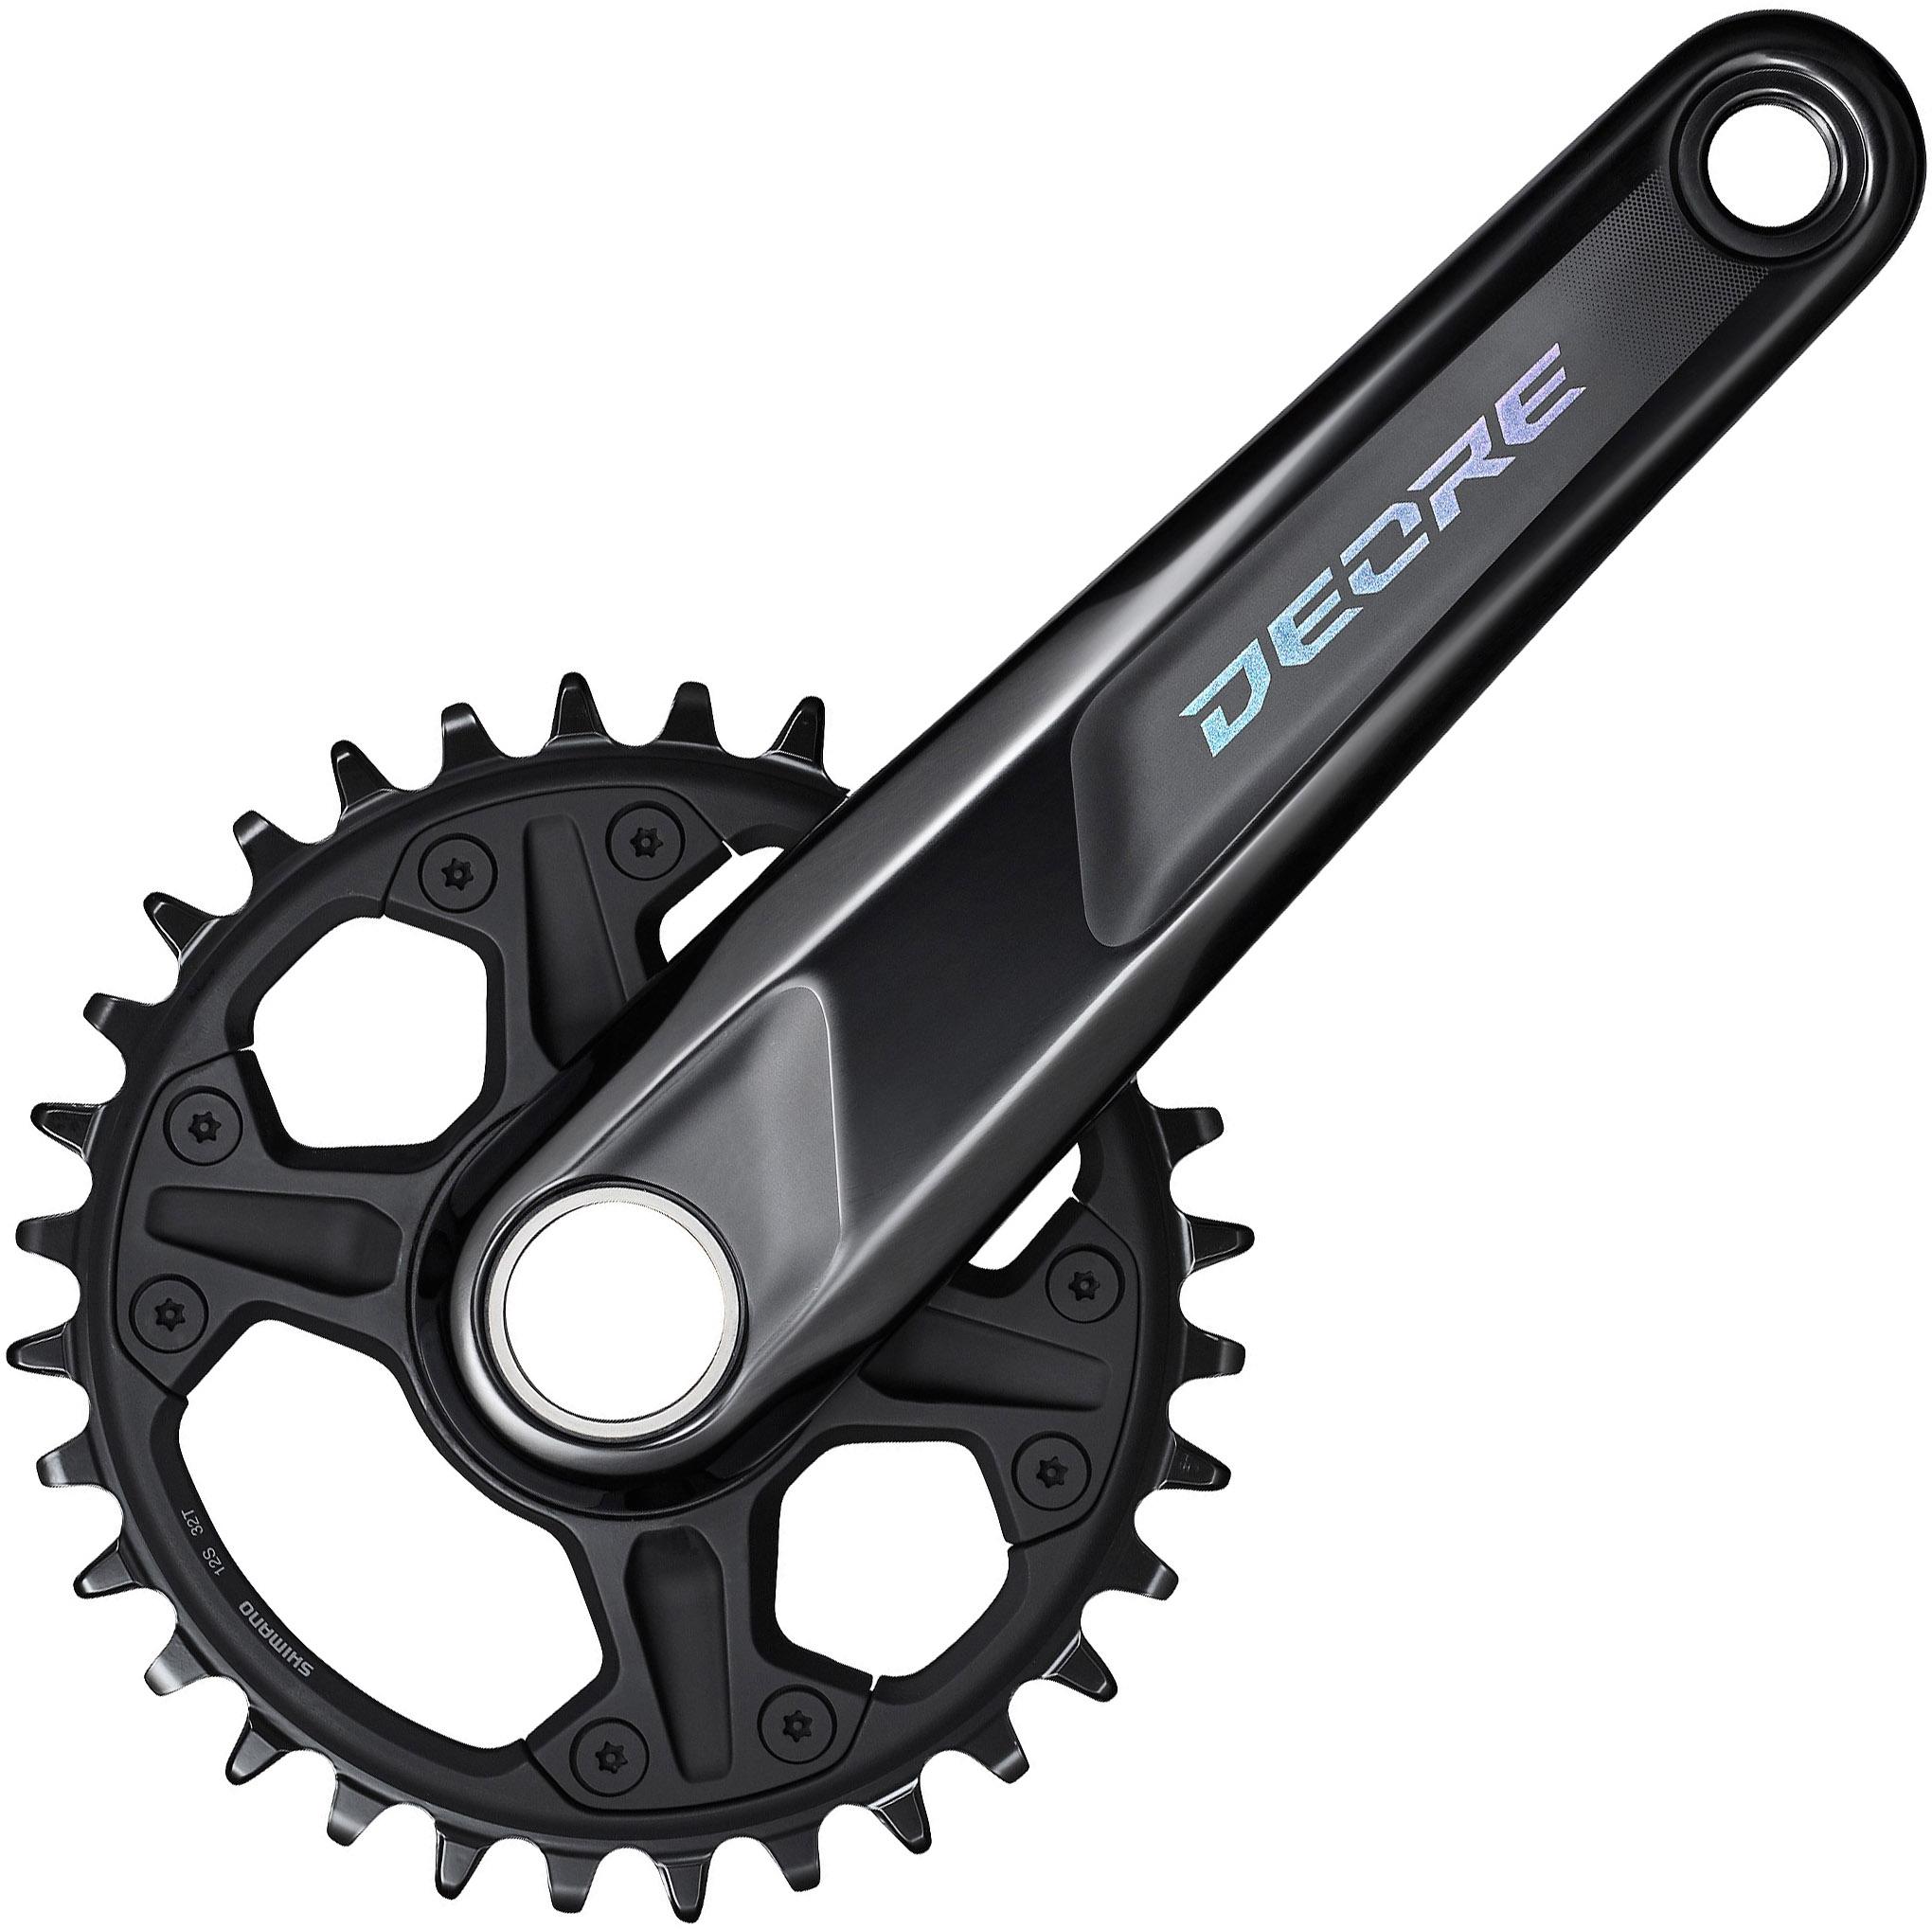 Shimano M6120 Deore 12 Speed Boost Single Chainset - Black